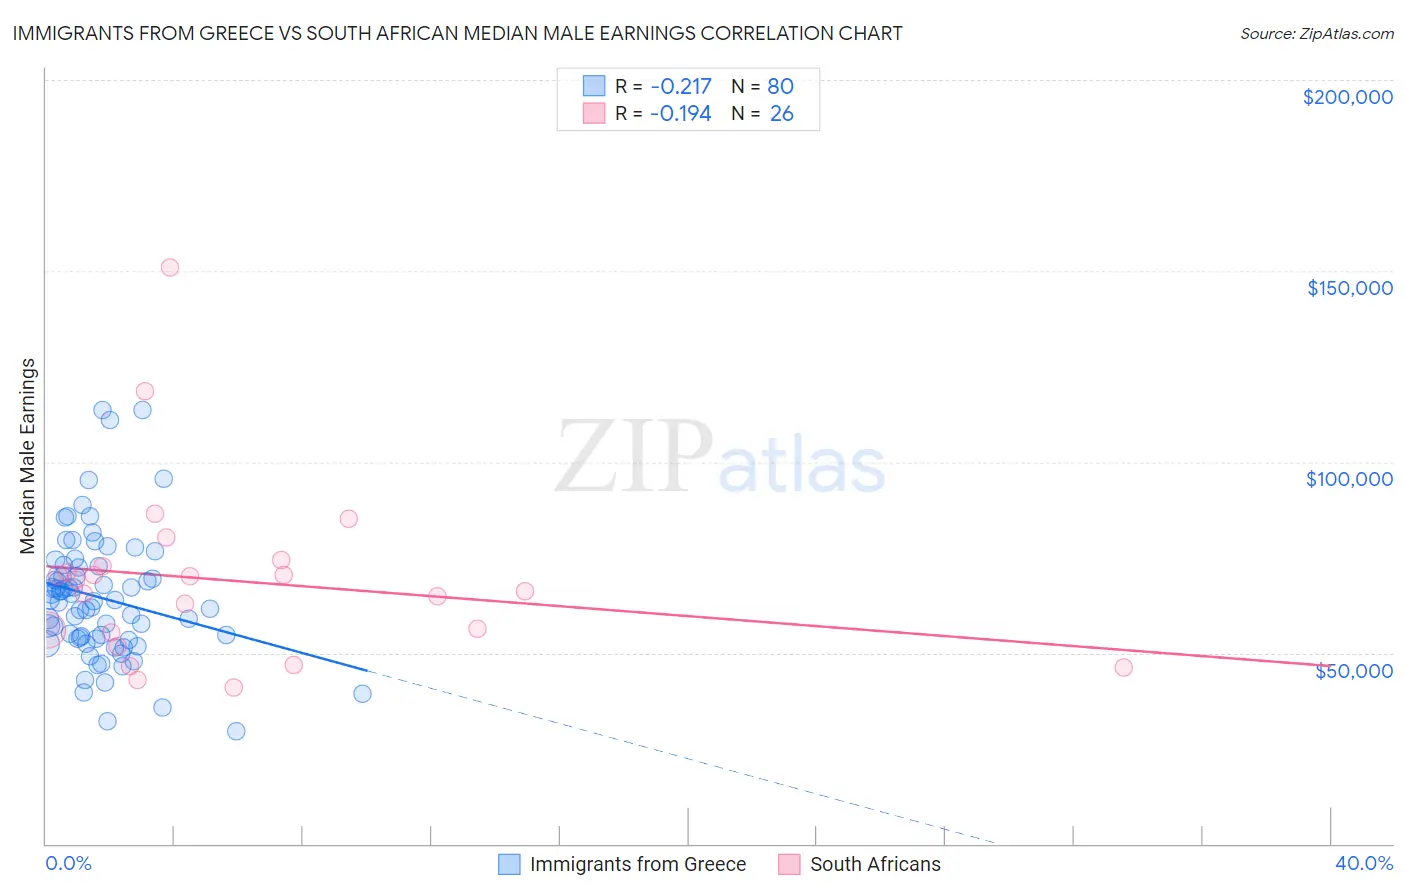 Immigrants from Greece vs South African Median Male Earnings